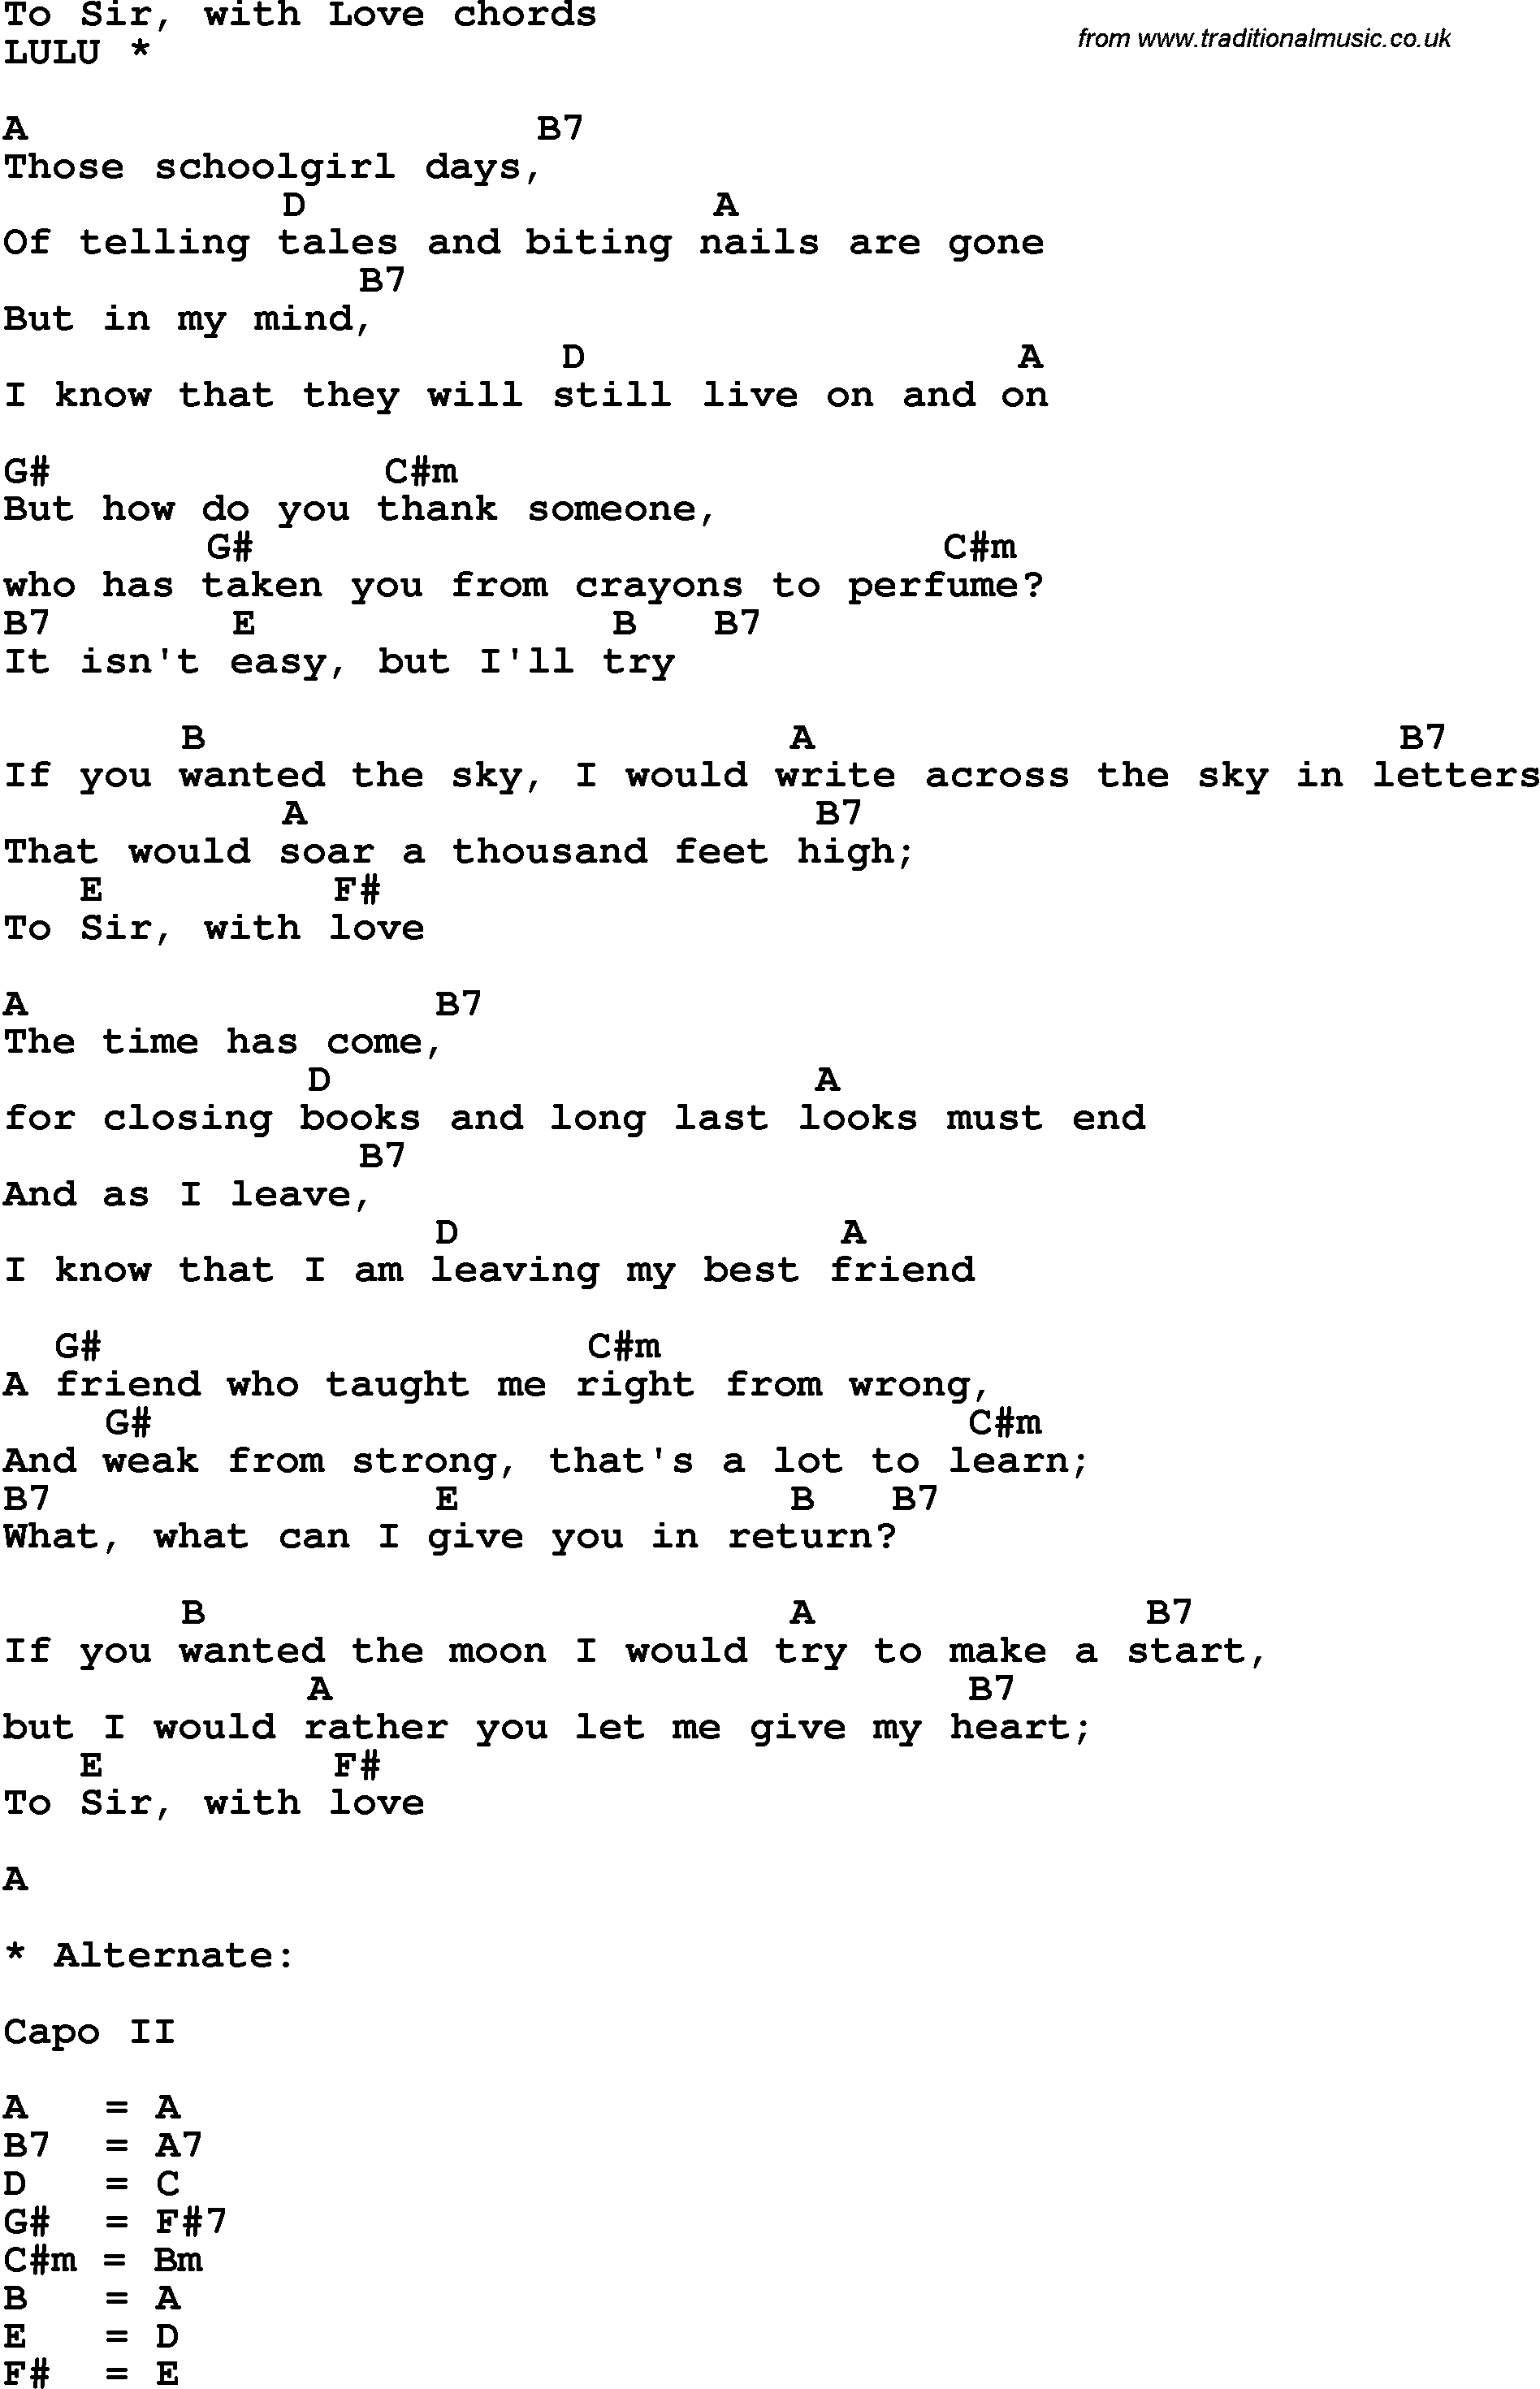 Song Lyrics with guitar chords for To Sir With Love